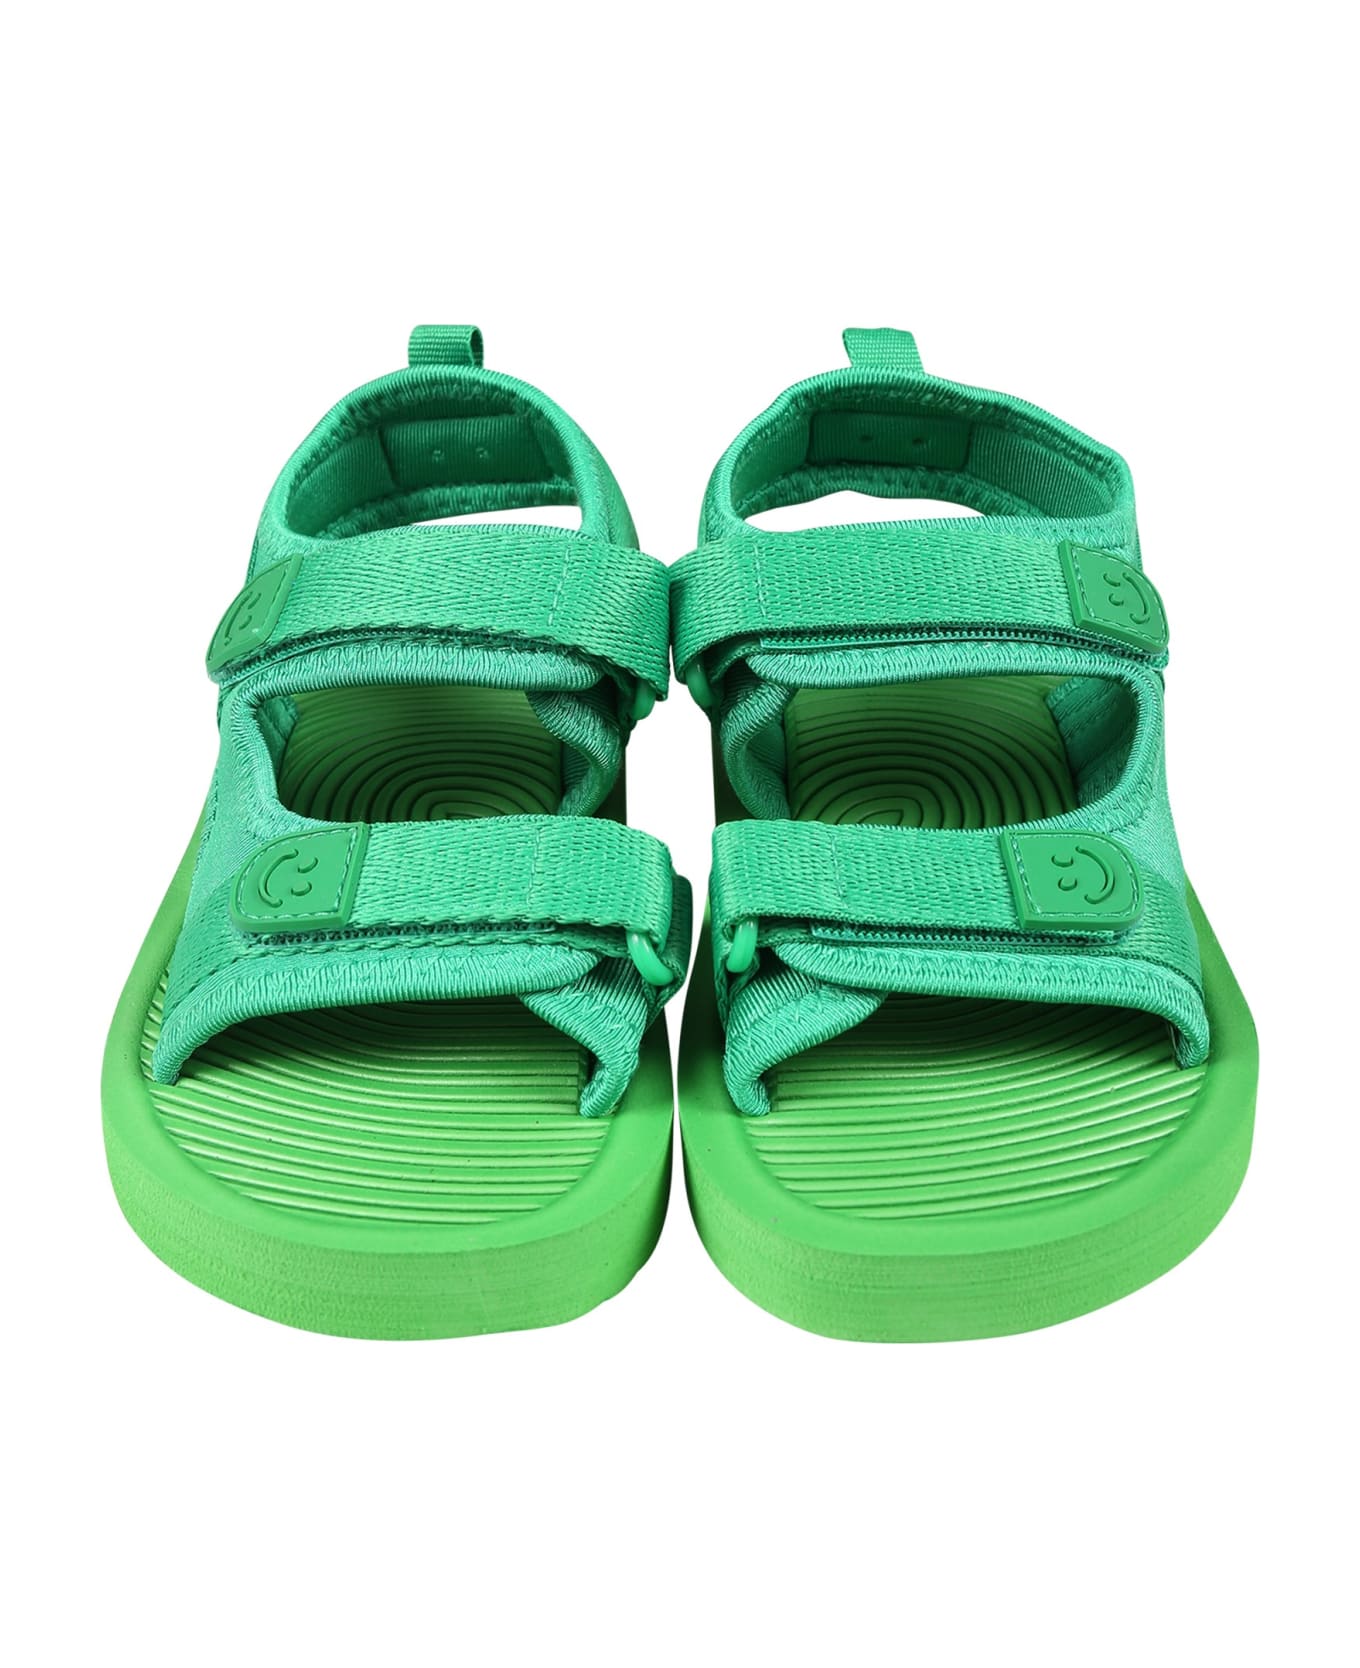 Molo Green Sandals For Babykids With Logo - Green